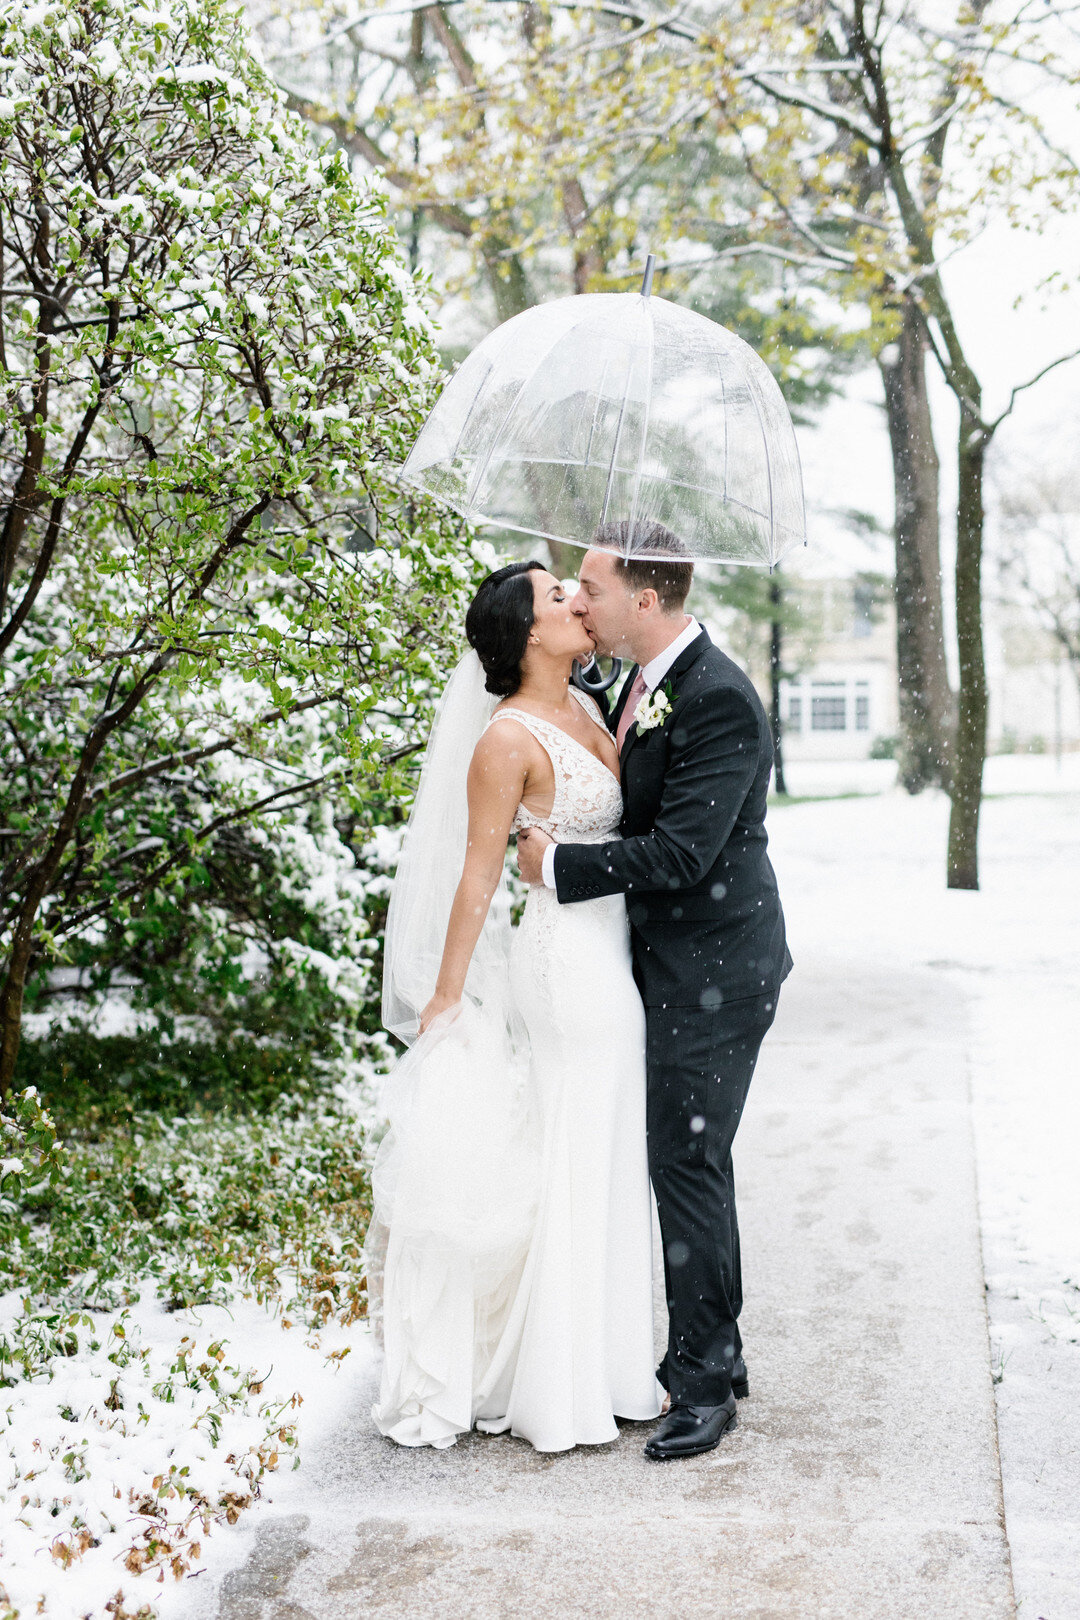 Snowy wedding day photo ideas: Chicago spring wedding captured by Hannah Rose Gray Photography. See more timeless wedding ideas on CHItheeWED.com!